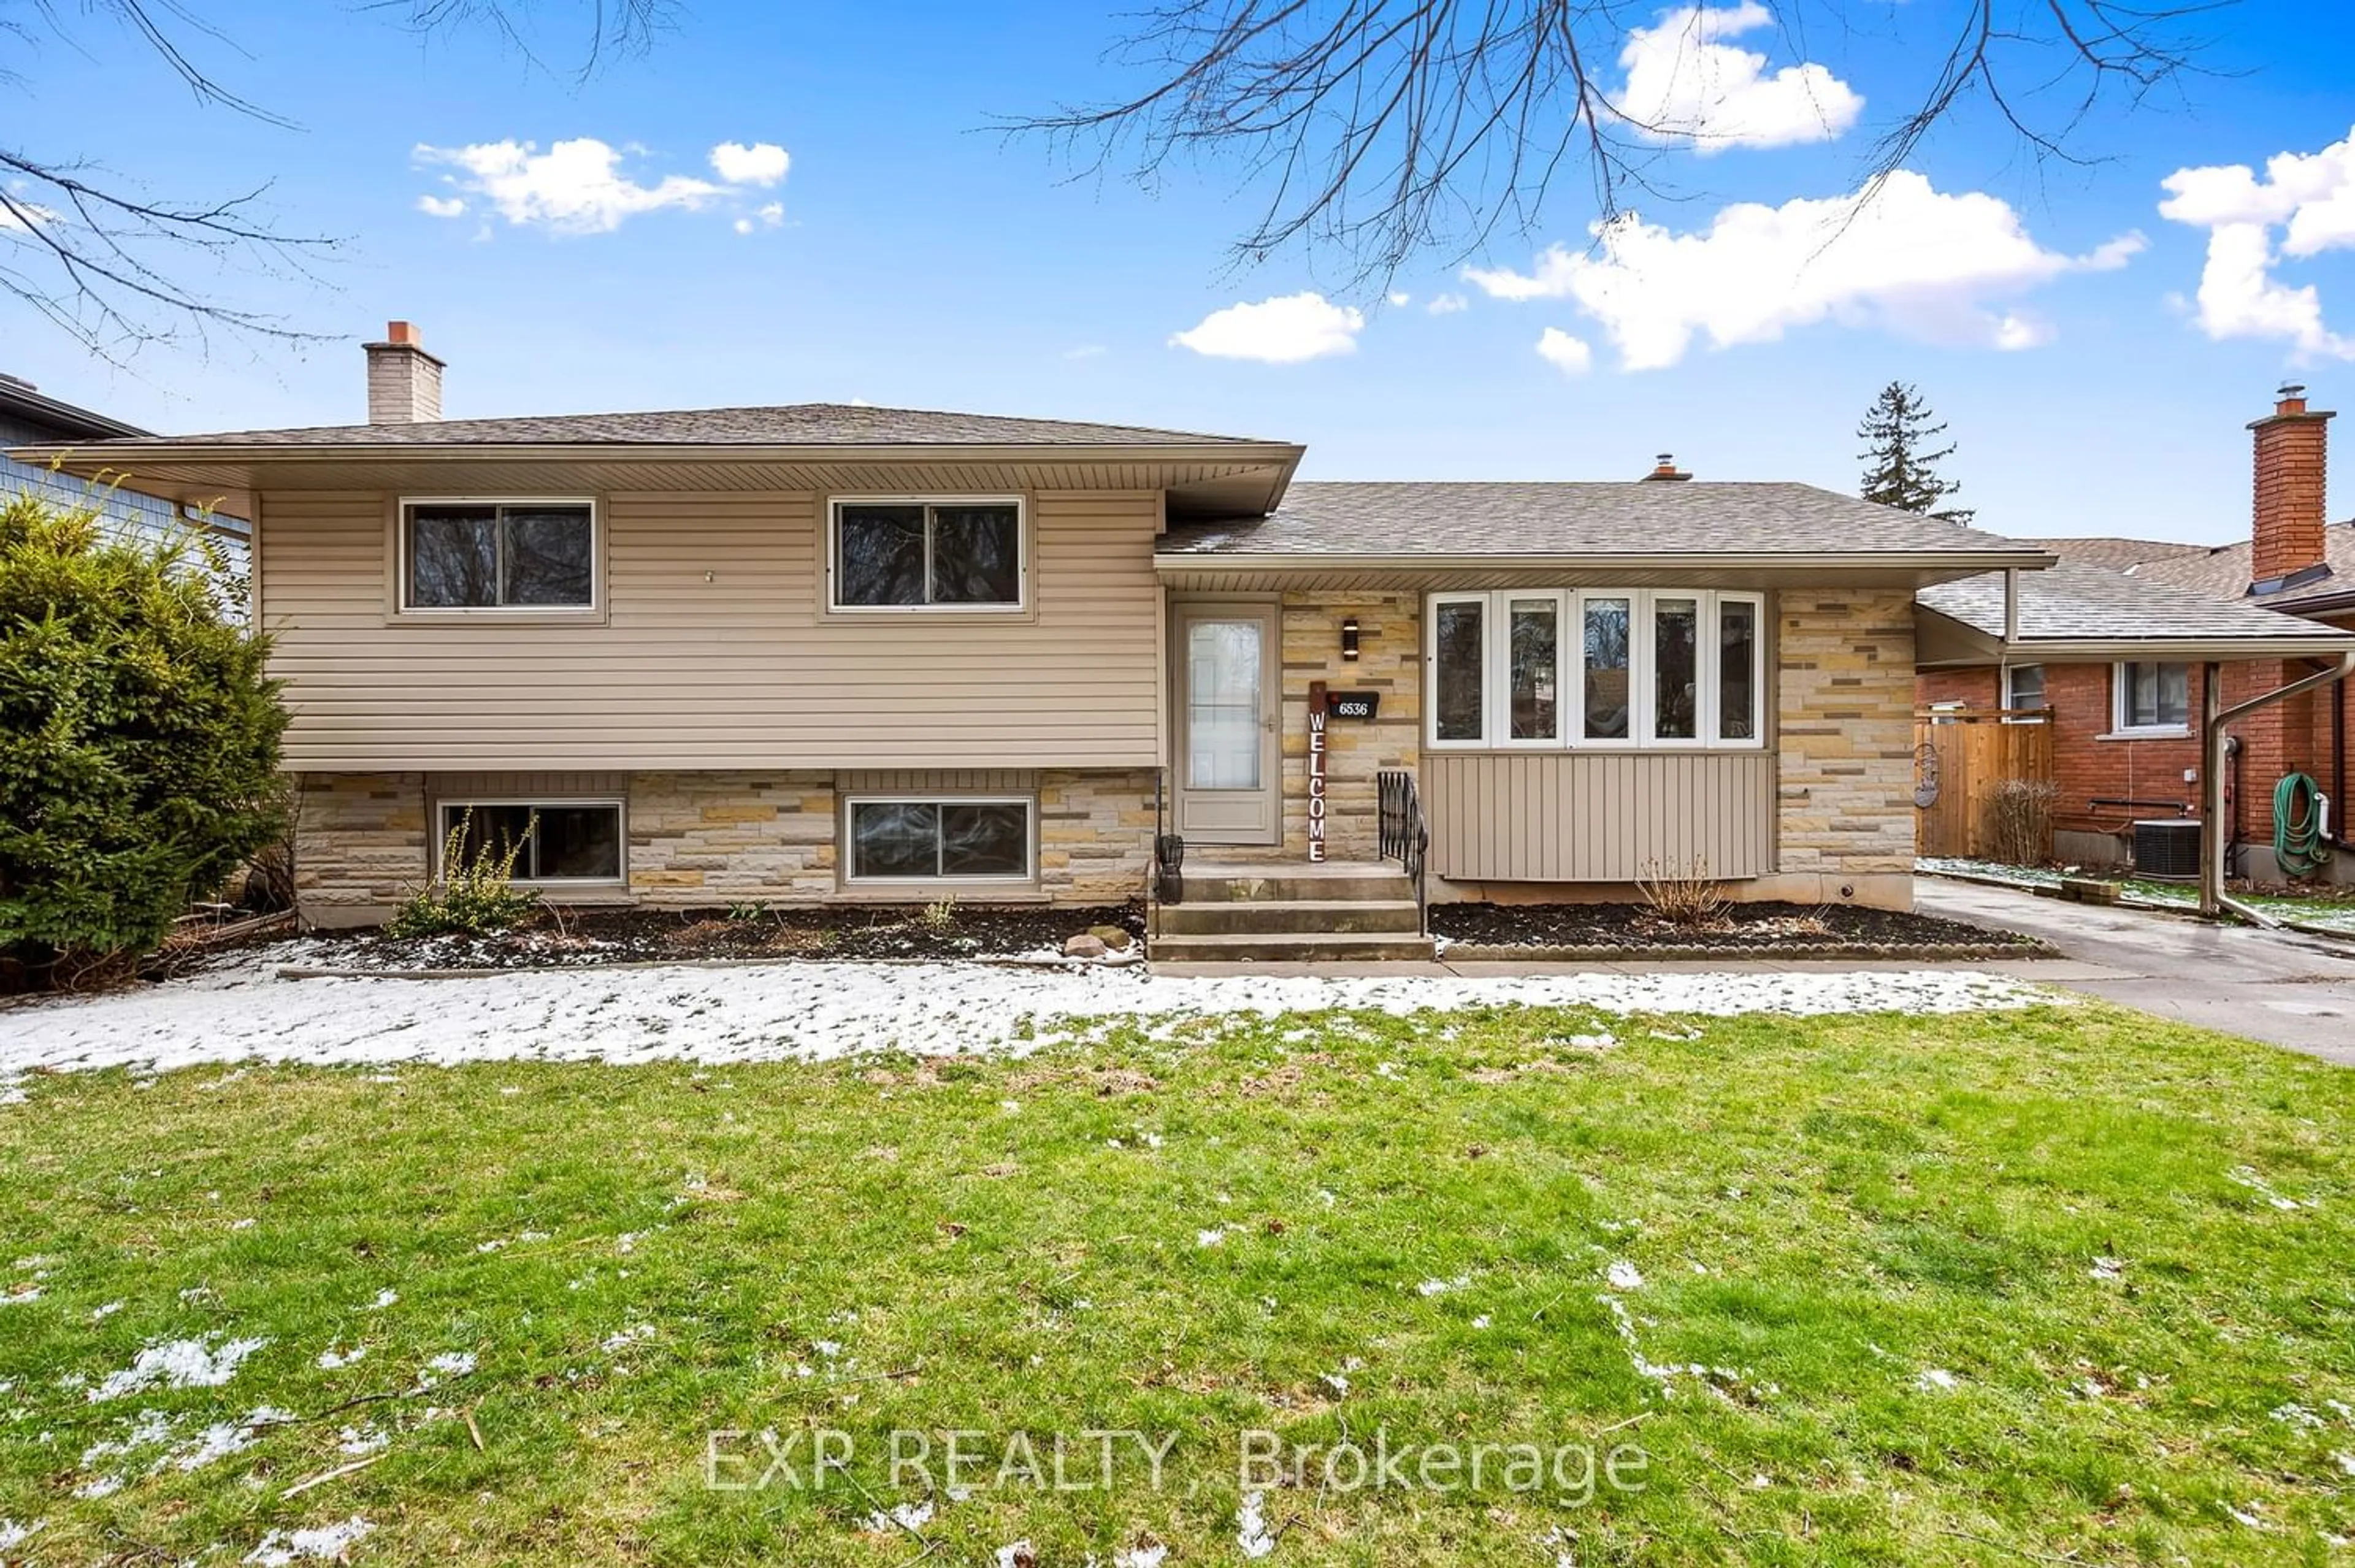 Frontside or backside of a home for 6536 Glengate St, Niagara Falls Ontario L2E 5S7